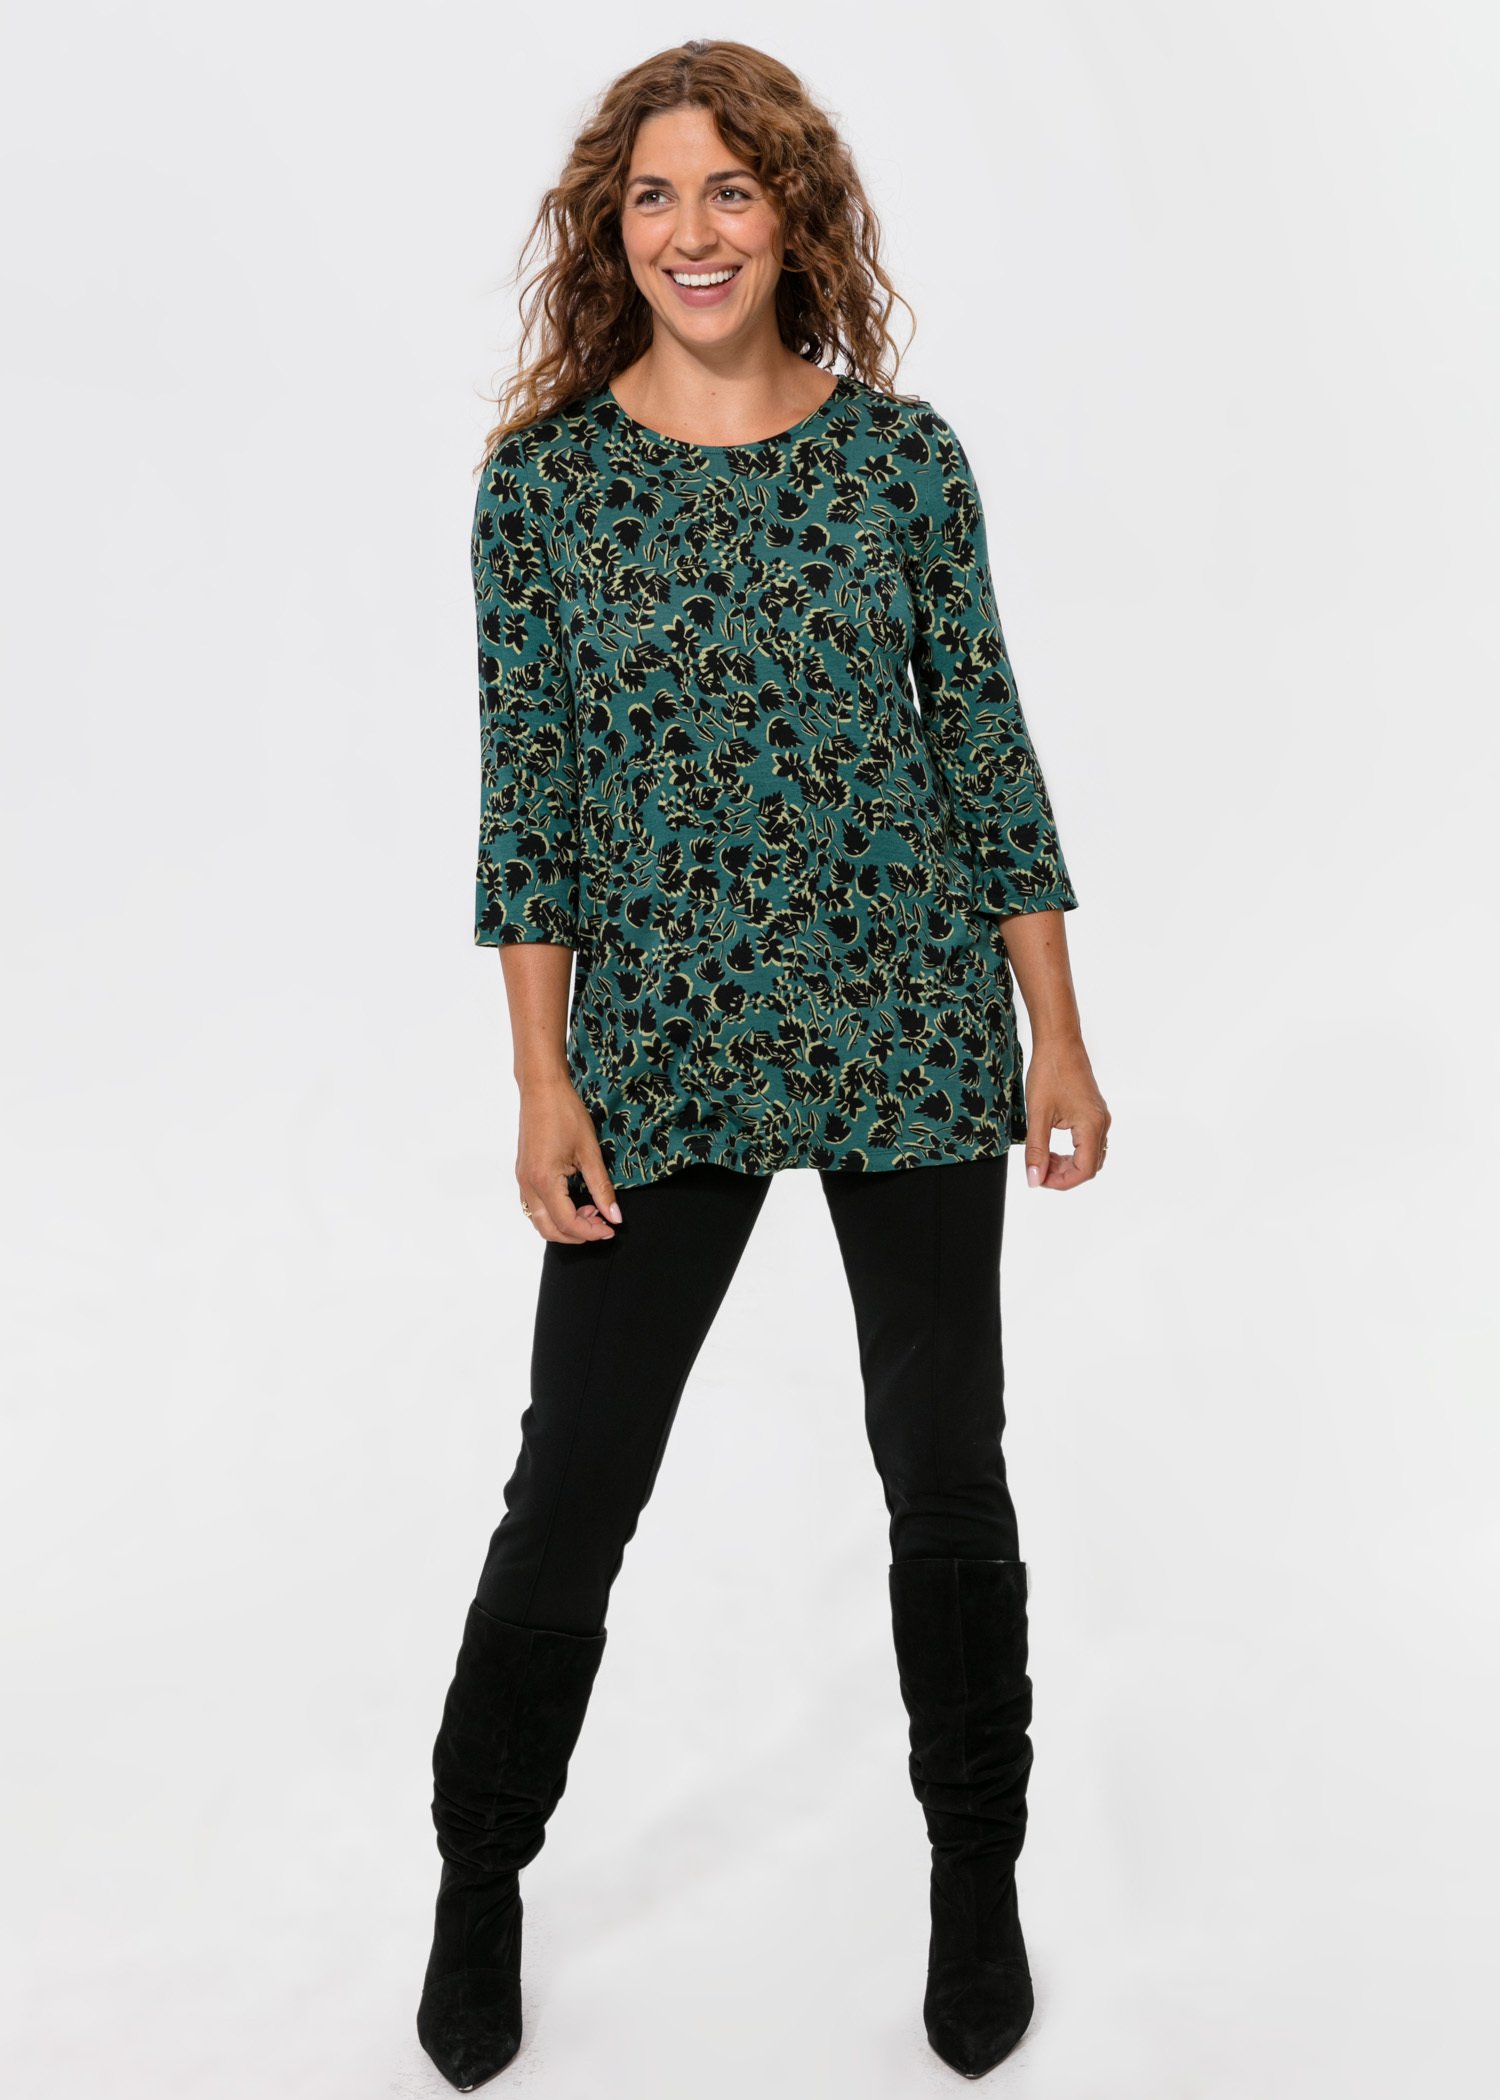 Patterned 3/4 sleeved top